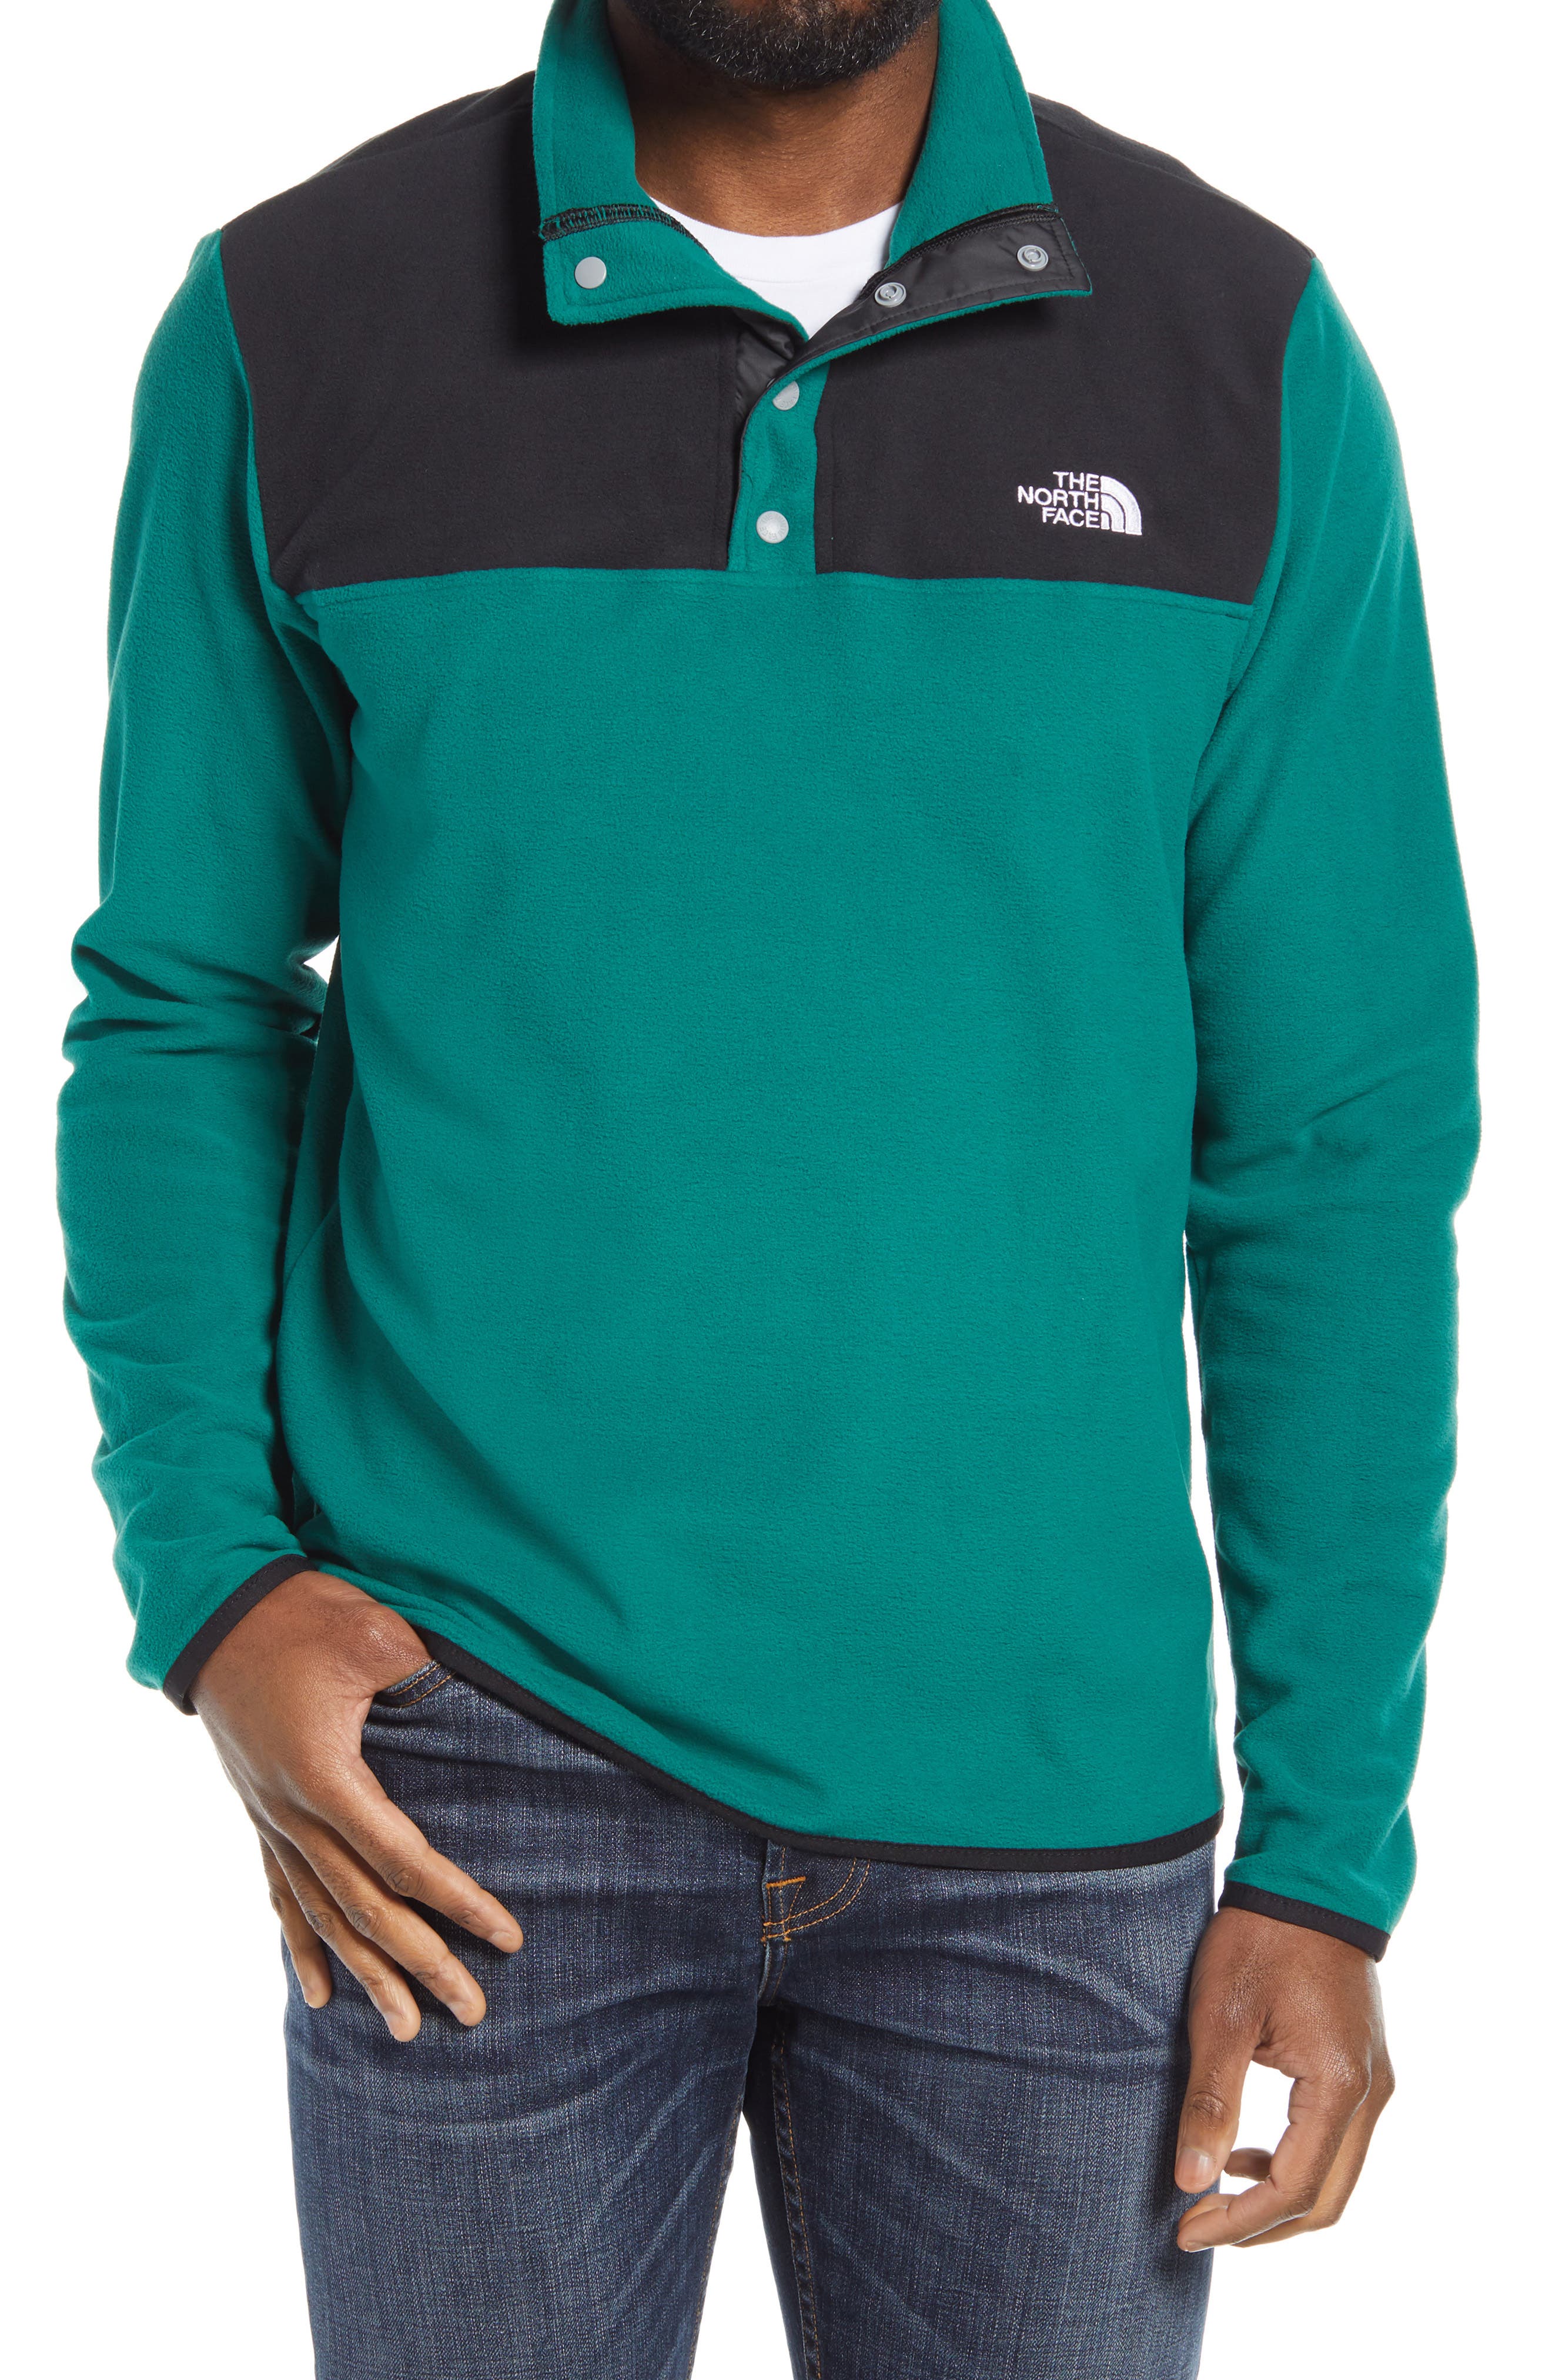 Men's The North Face Clothing | Nordstrom